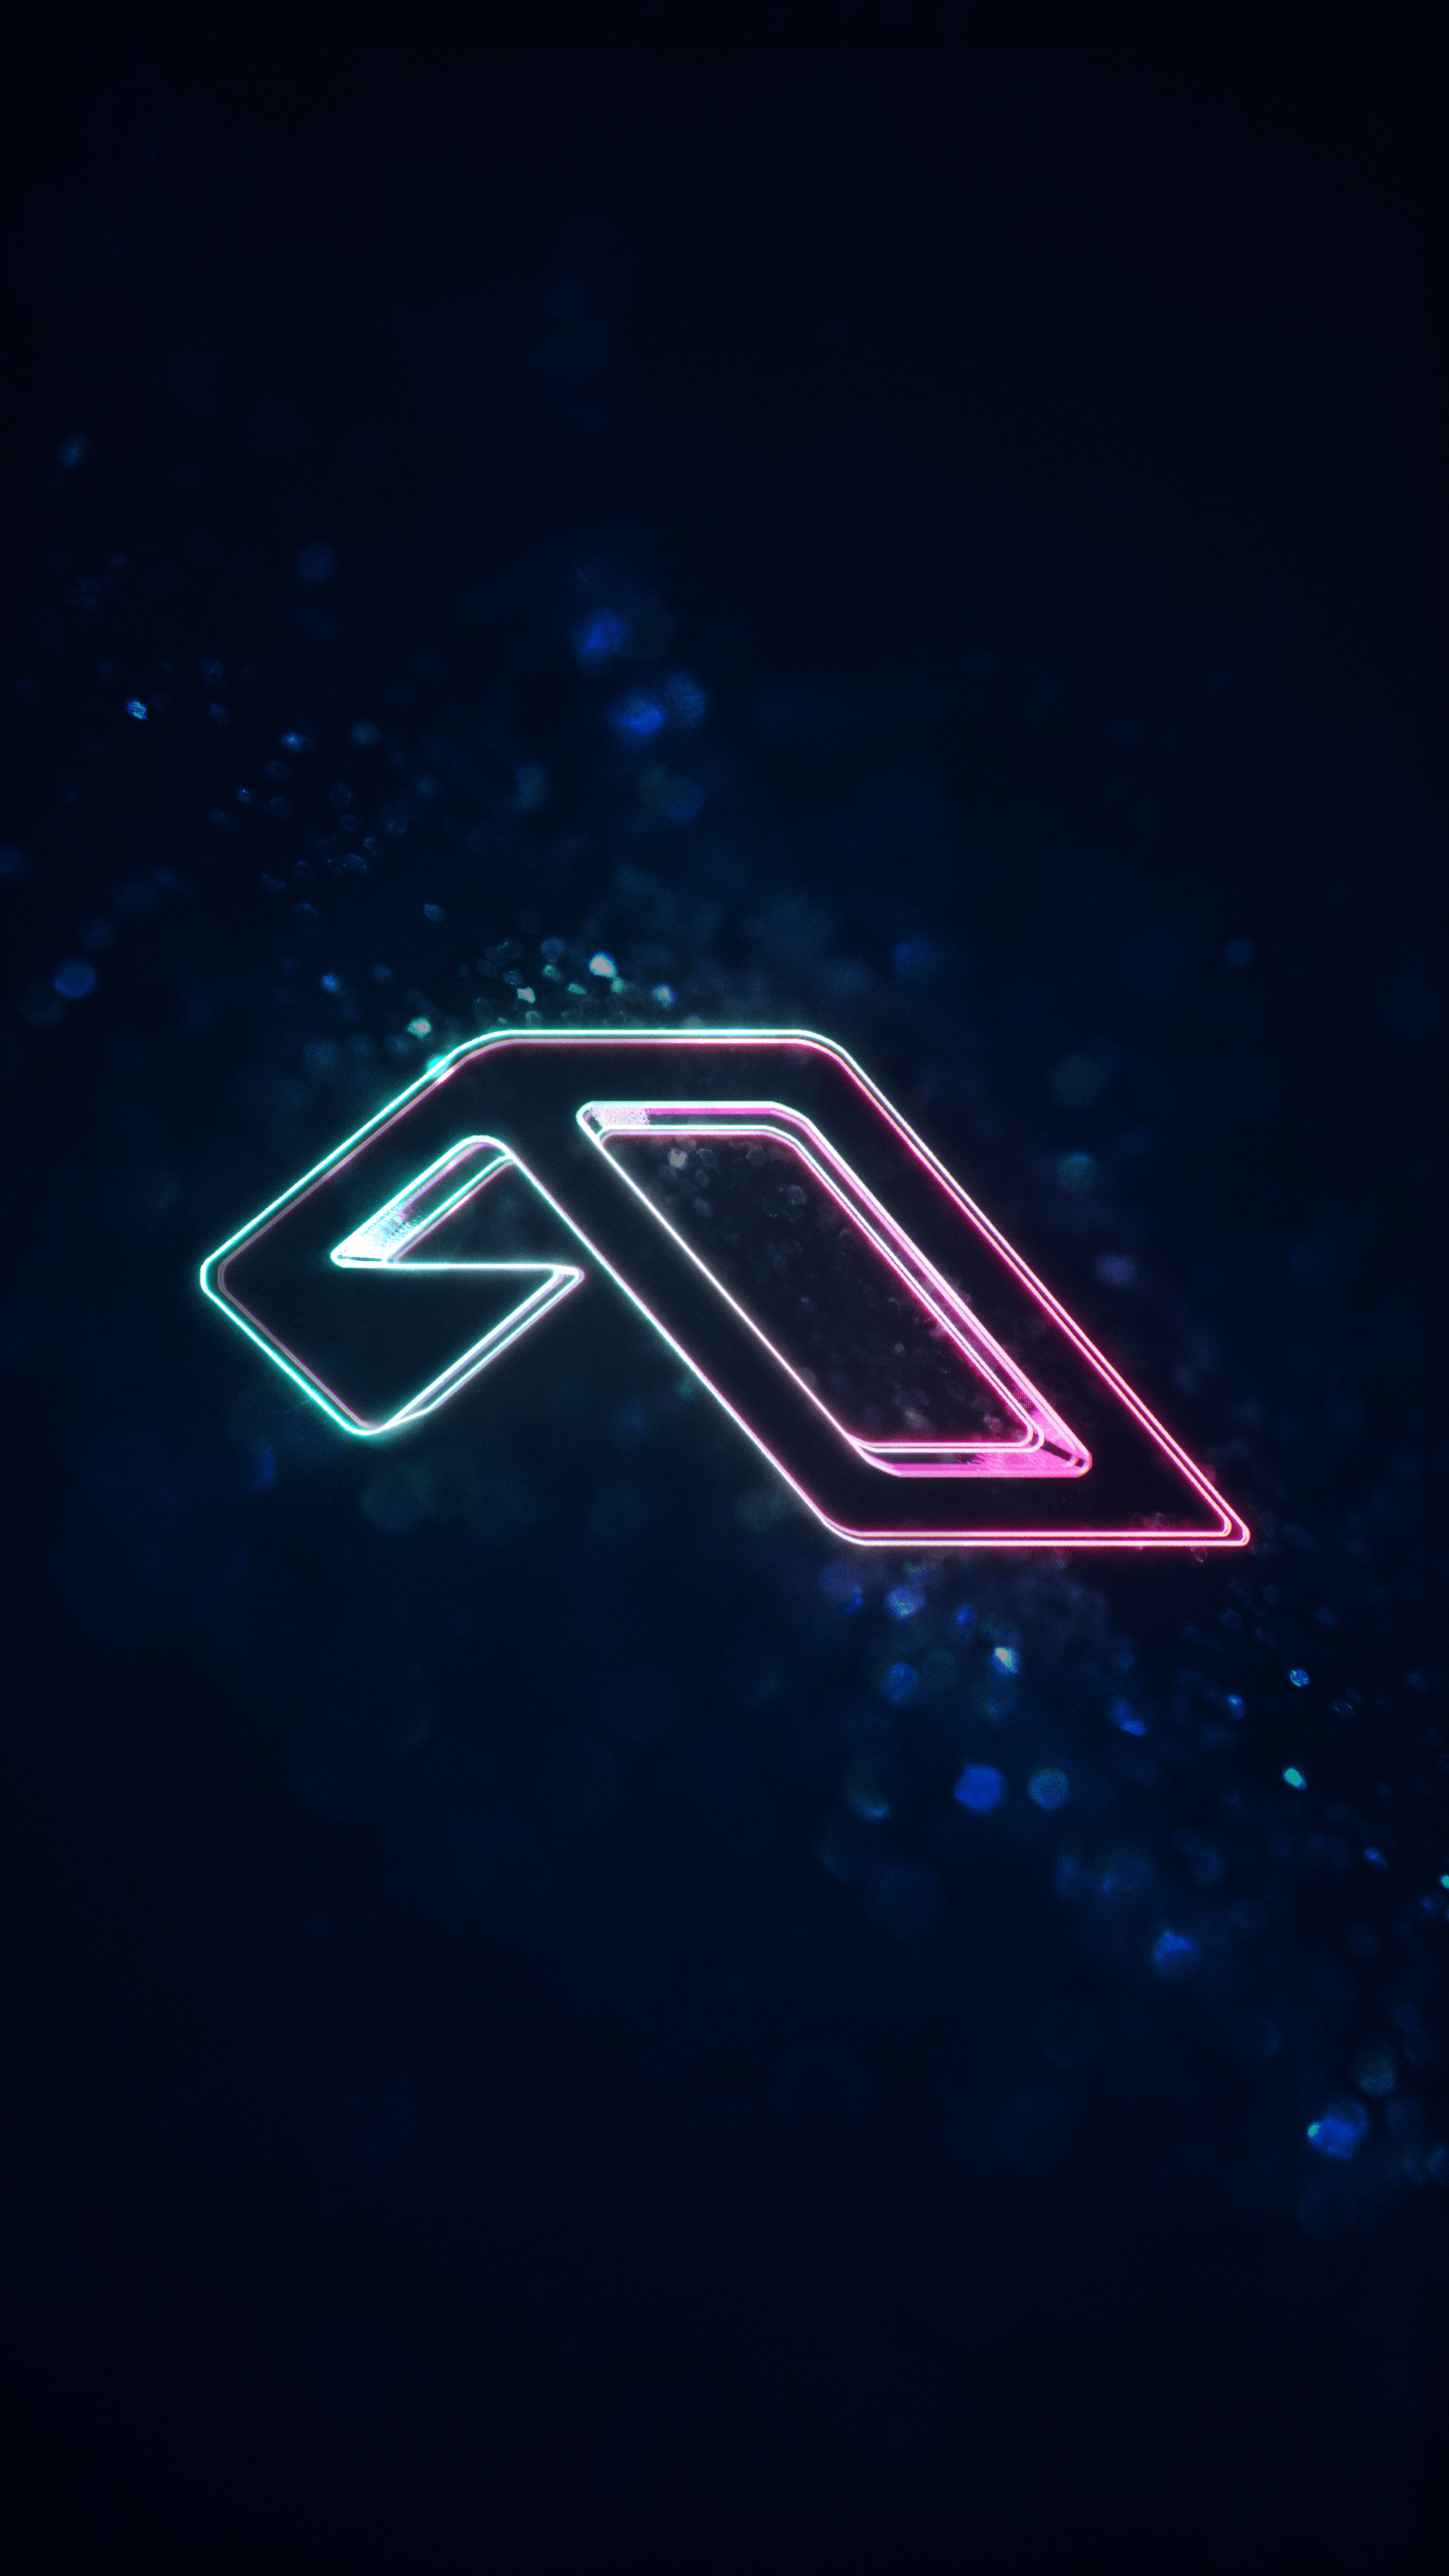 3D Neon Anjunabeats Mobile Wallpaper iPhone / Android